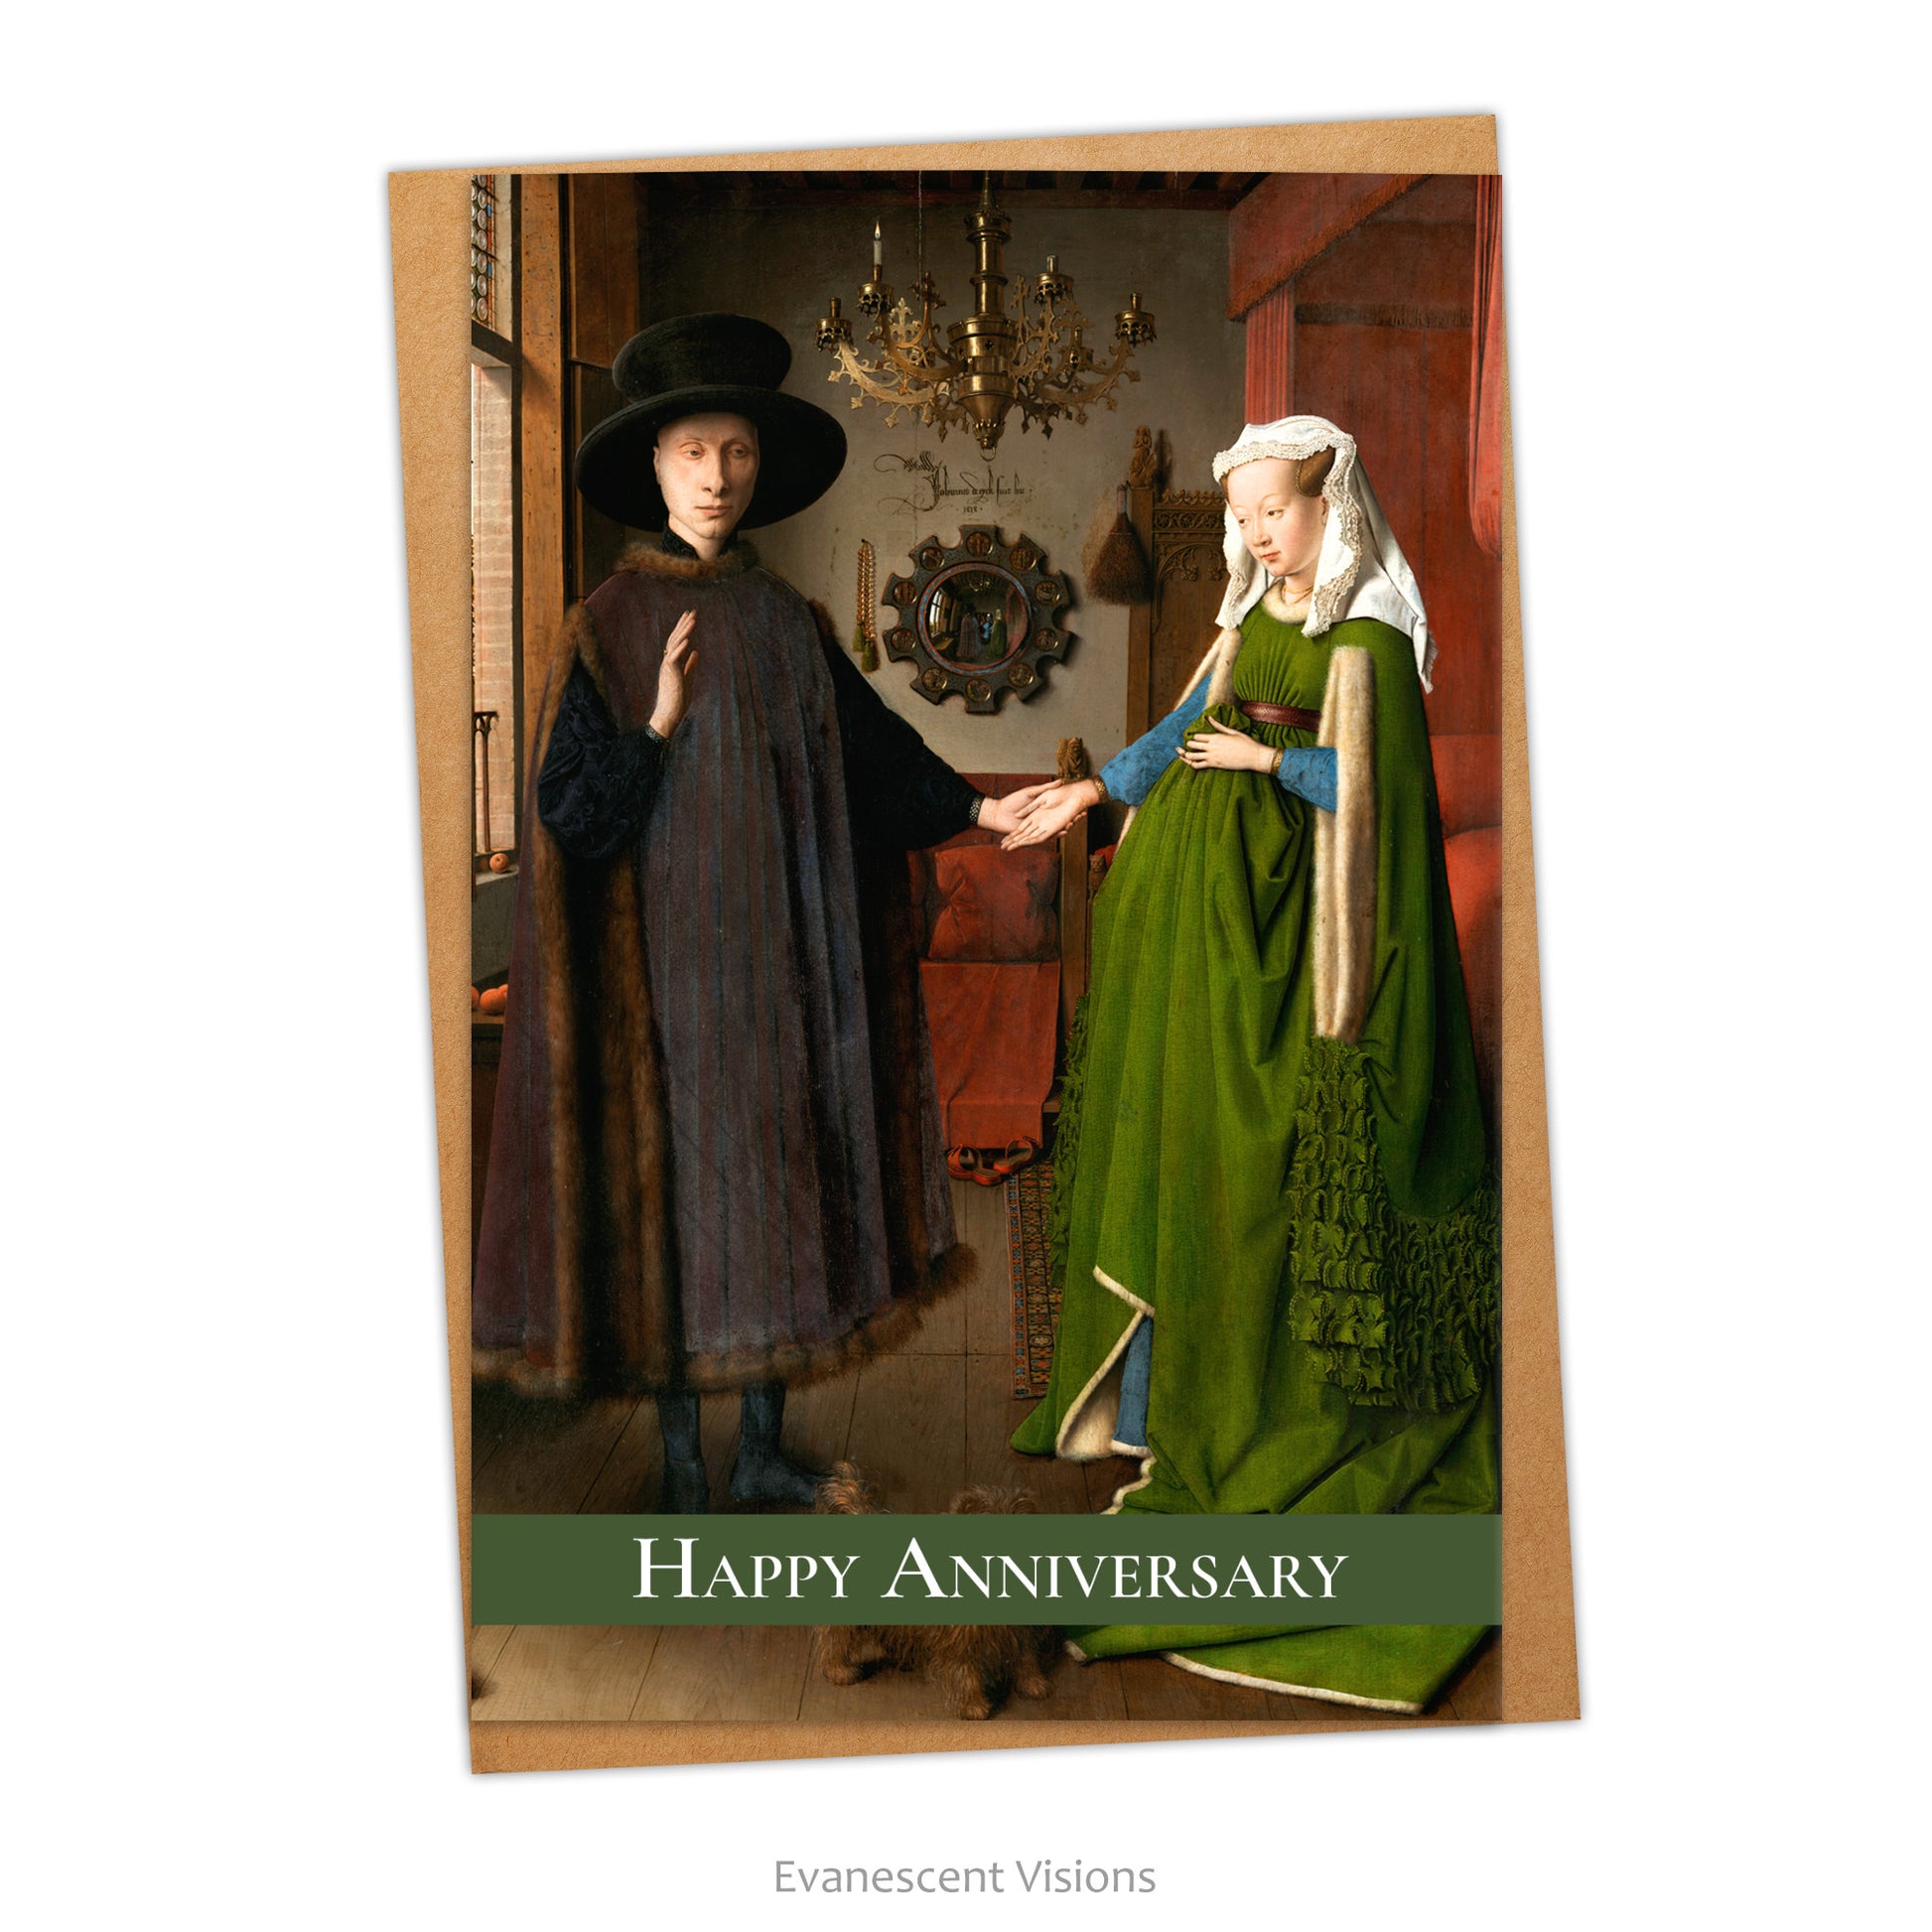 Happy Anniversary card and envelope. Image on card shows famous 'Arnolfini Marriage' by Jan van Eyck.